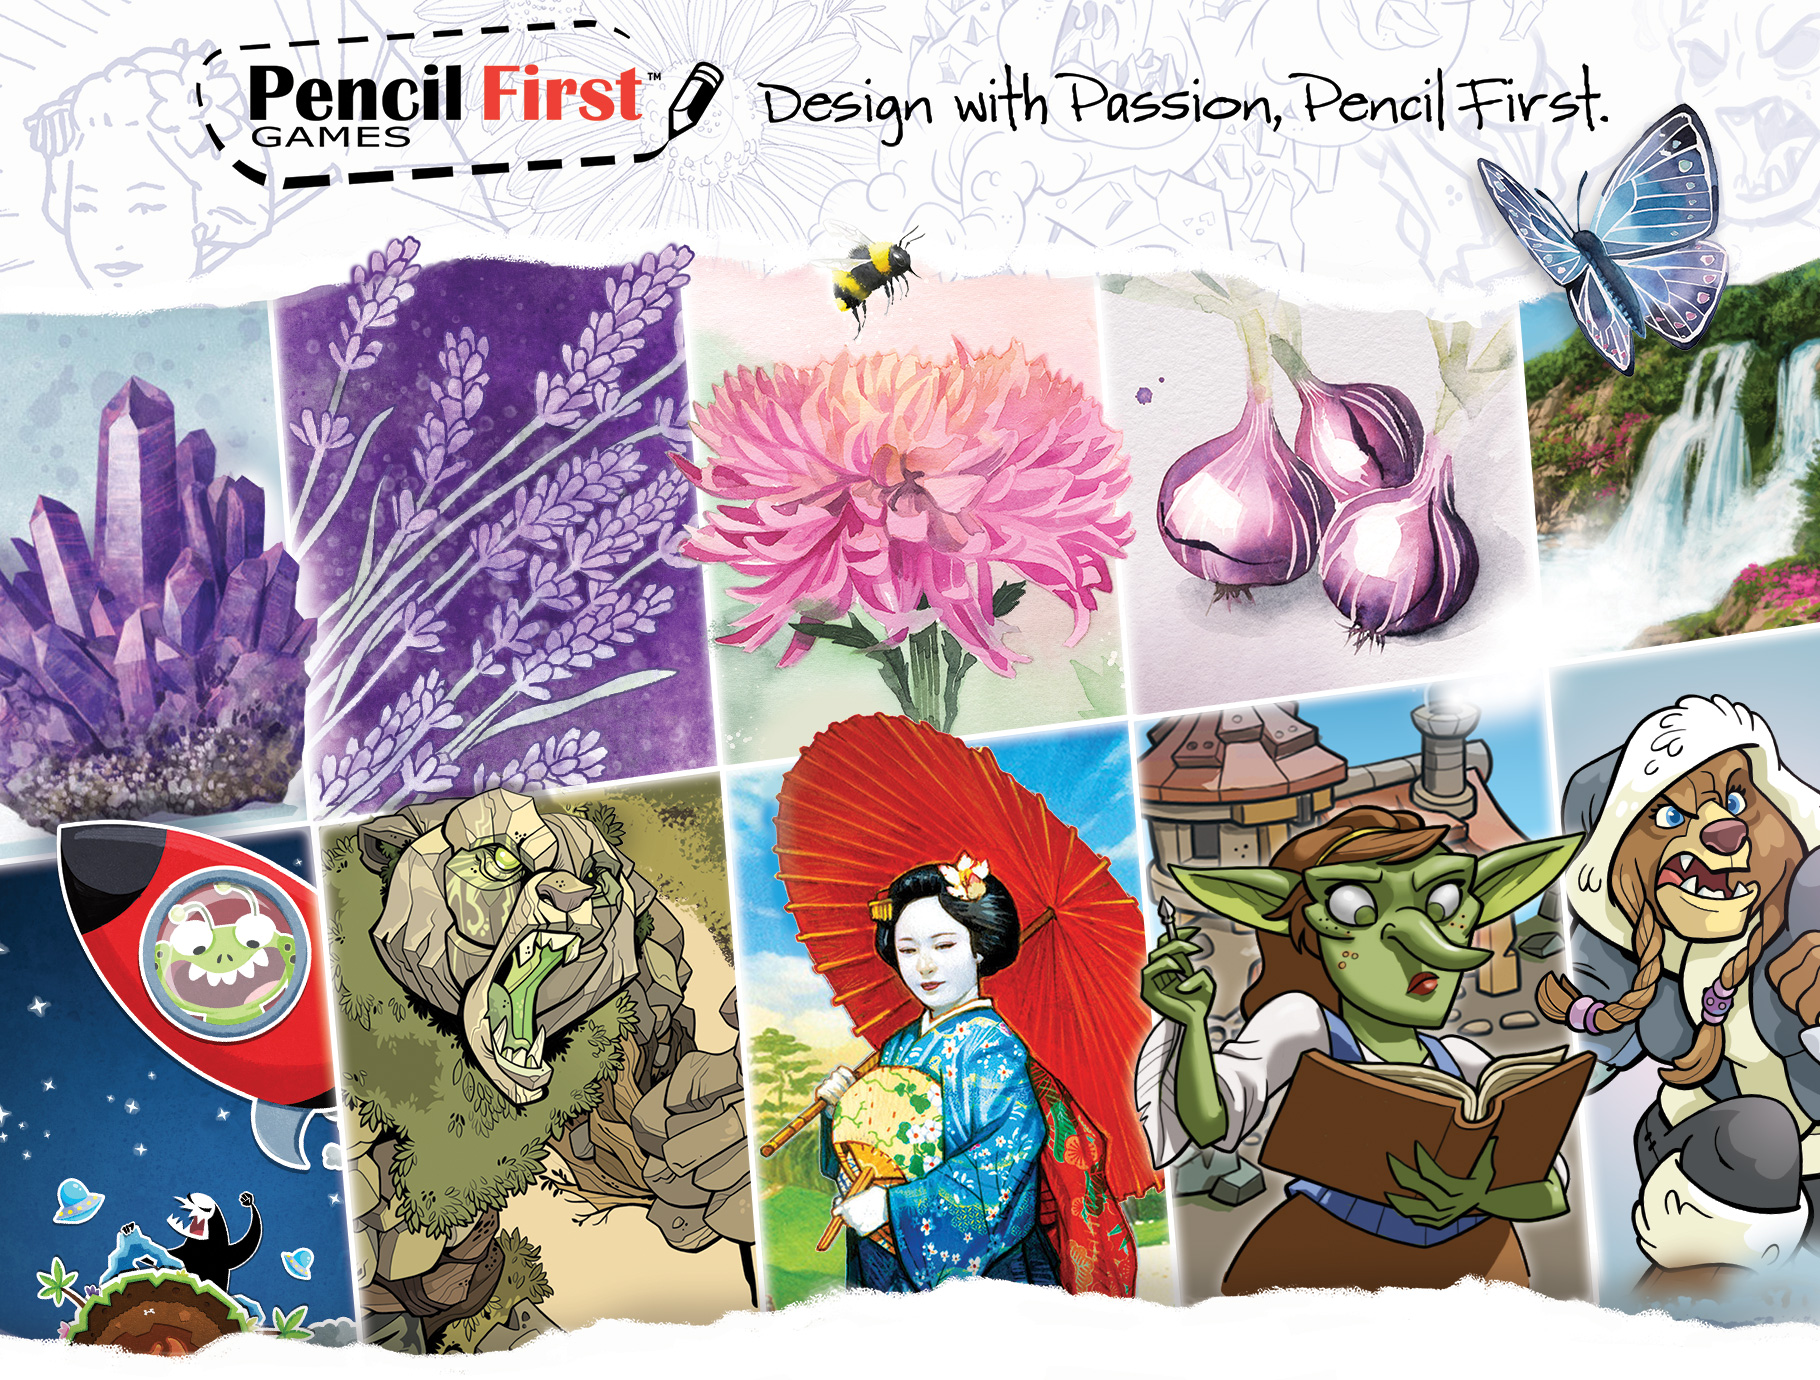 Welcome to Pencil First Games!